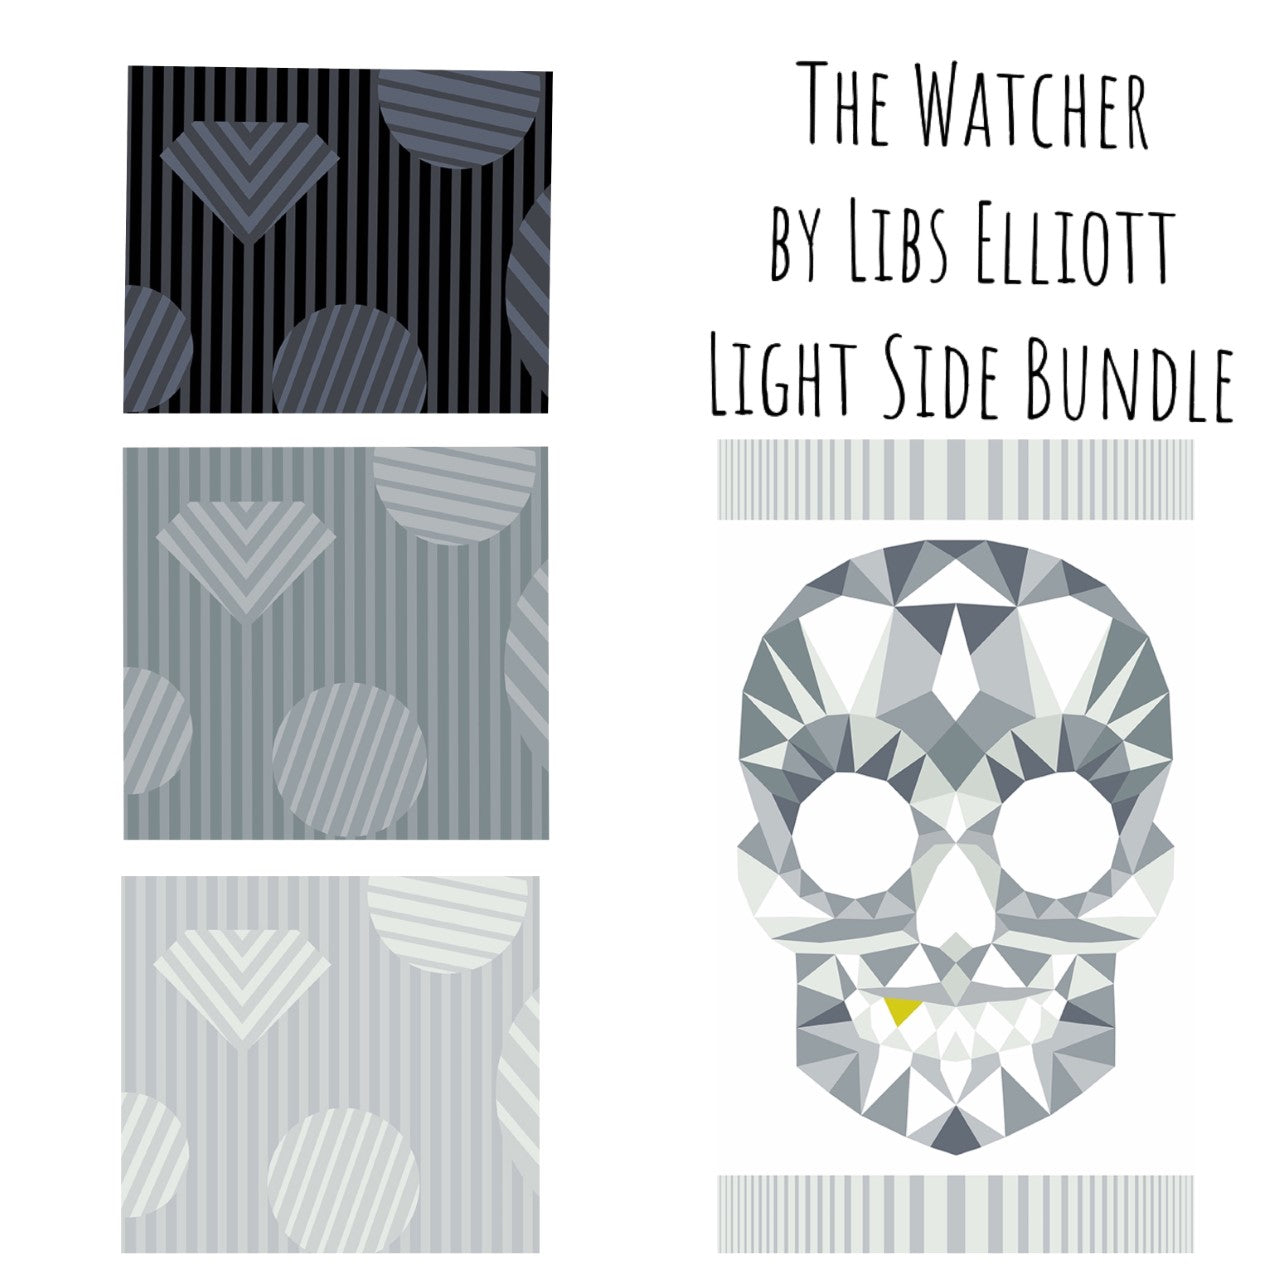 Light Side Bundle of The Watcher by Libs Elliott for Andover Fabrics